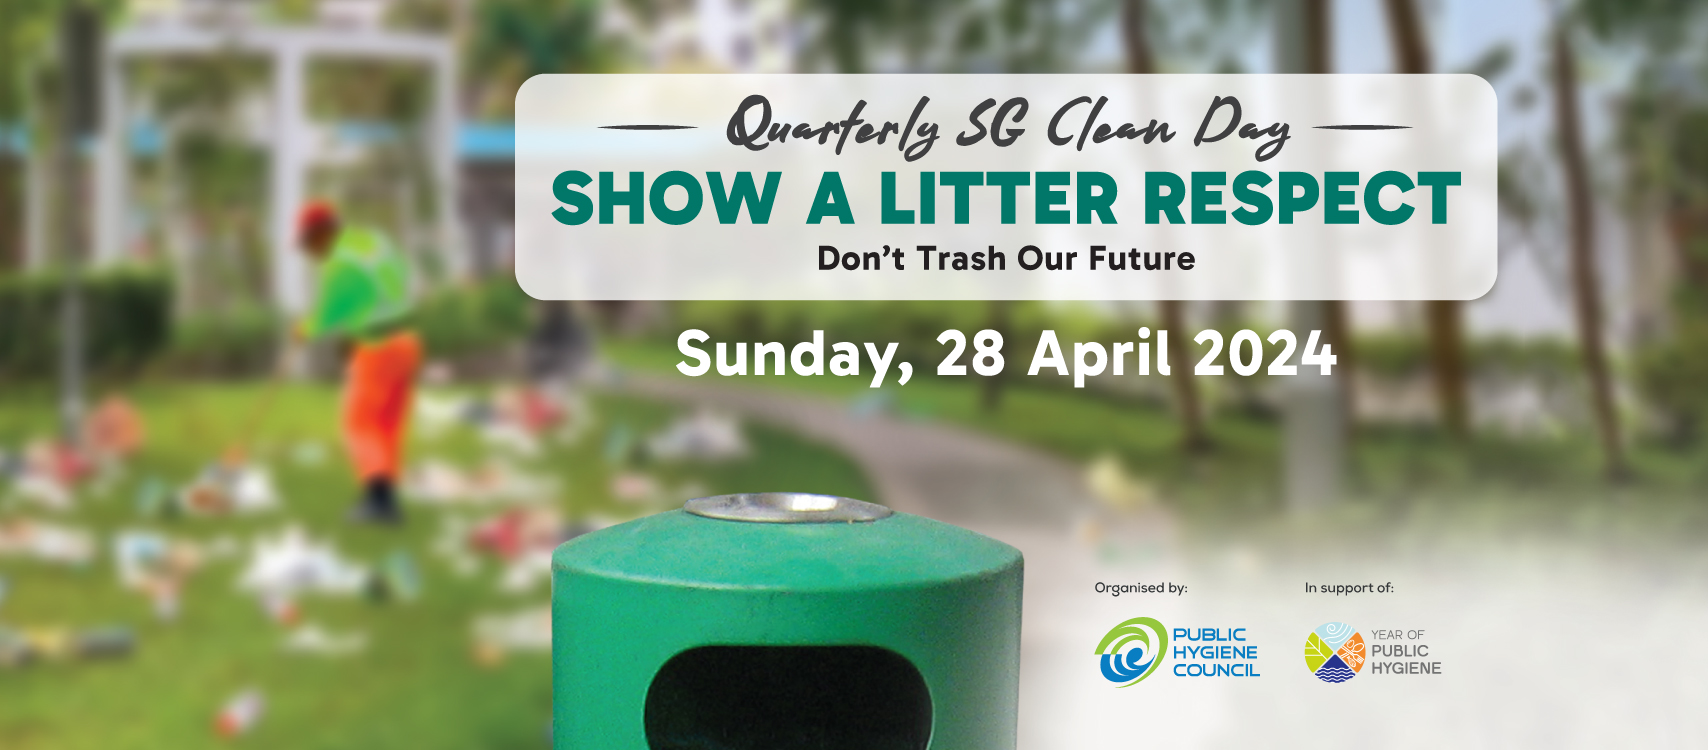 PHC SG Clean Day 2024 FB Cover